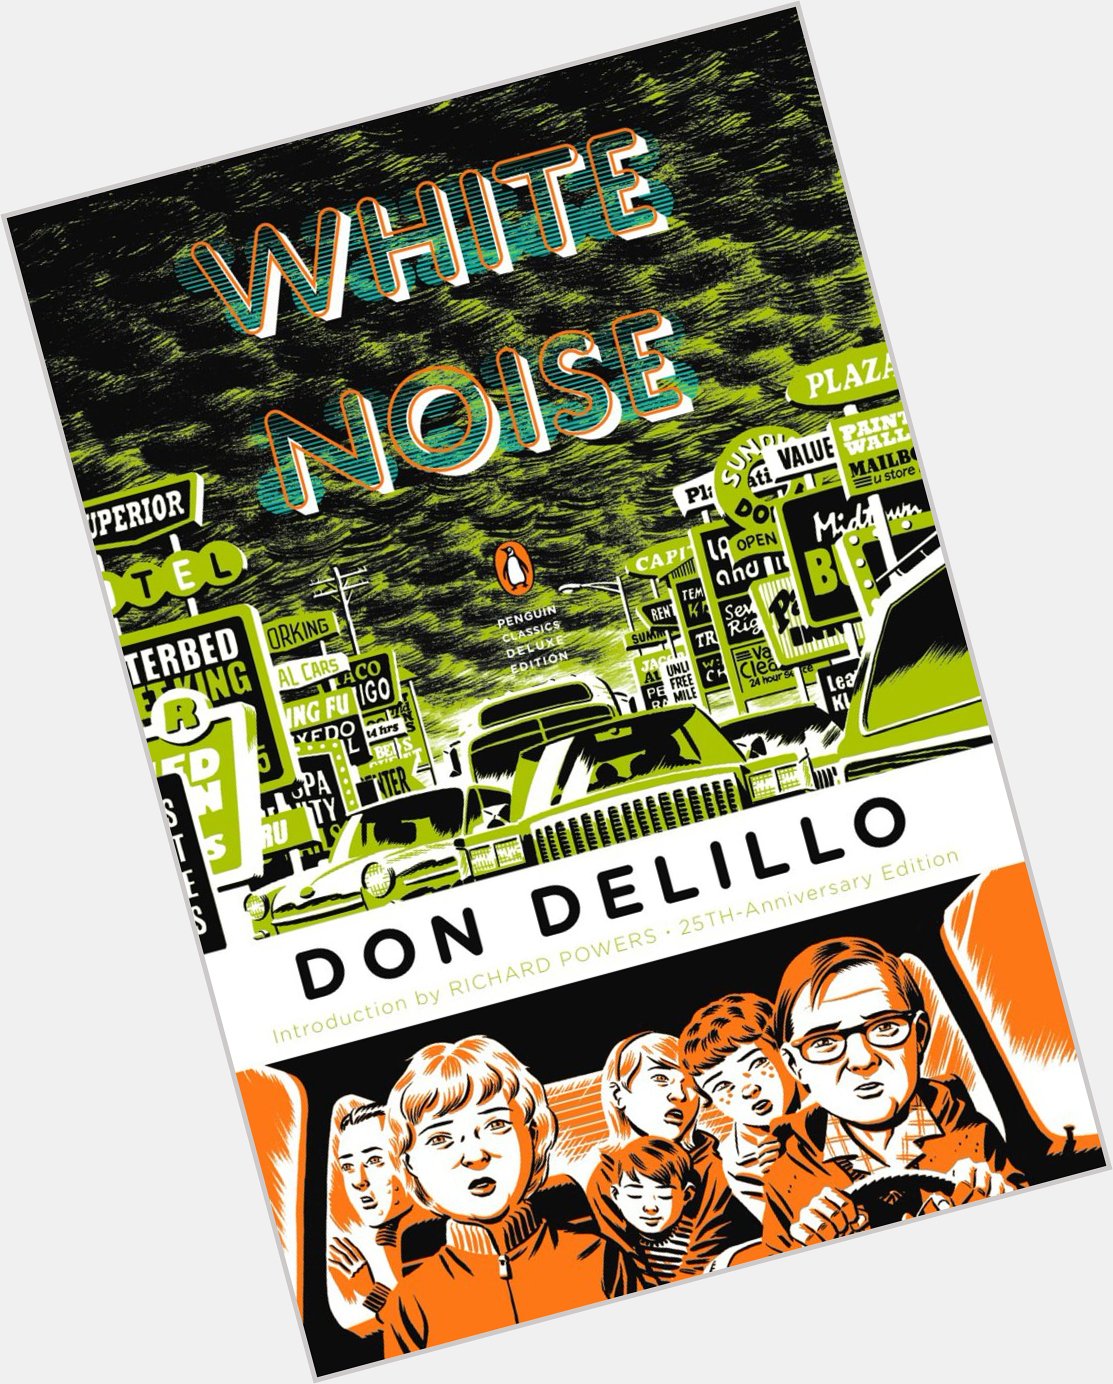 Happy birthday to National Book Award-winning author Don DeLillo, who was born in 1936. 